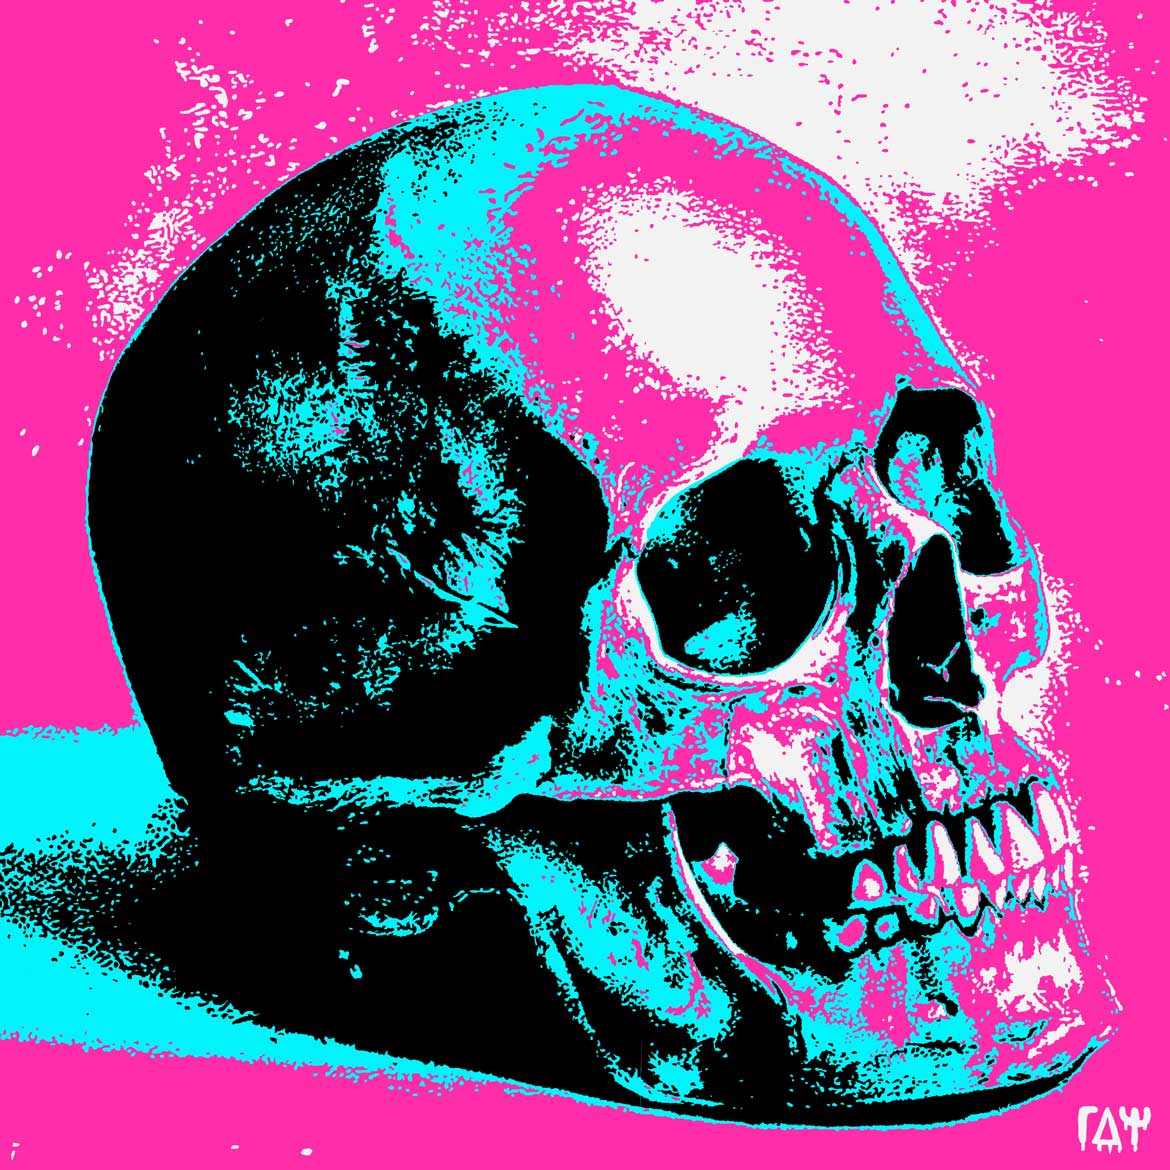 Skull on Pink David Bowie